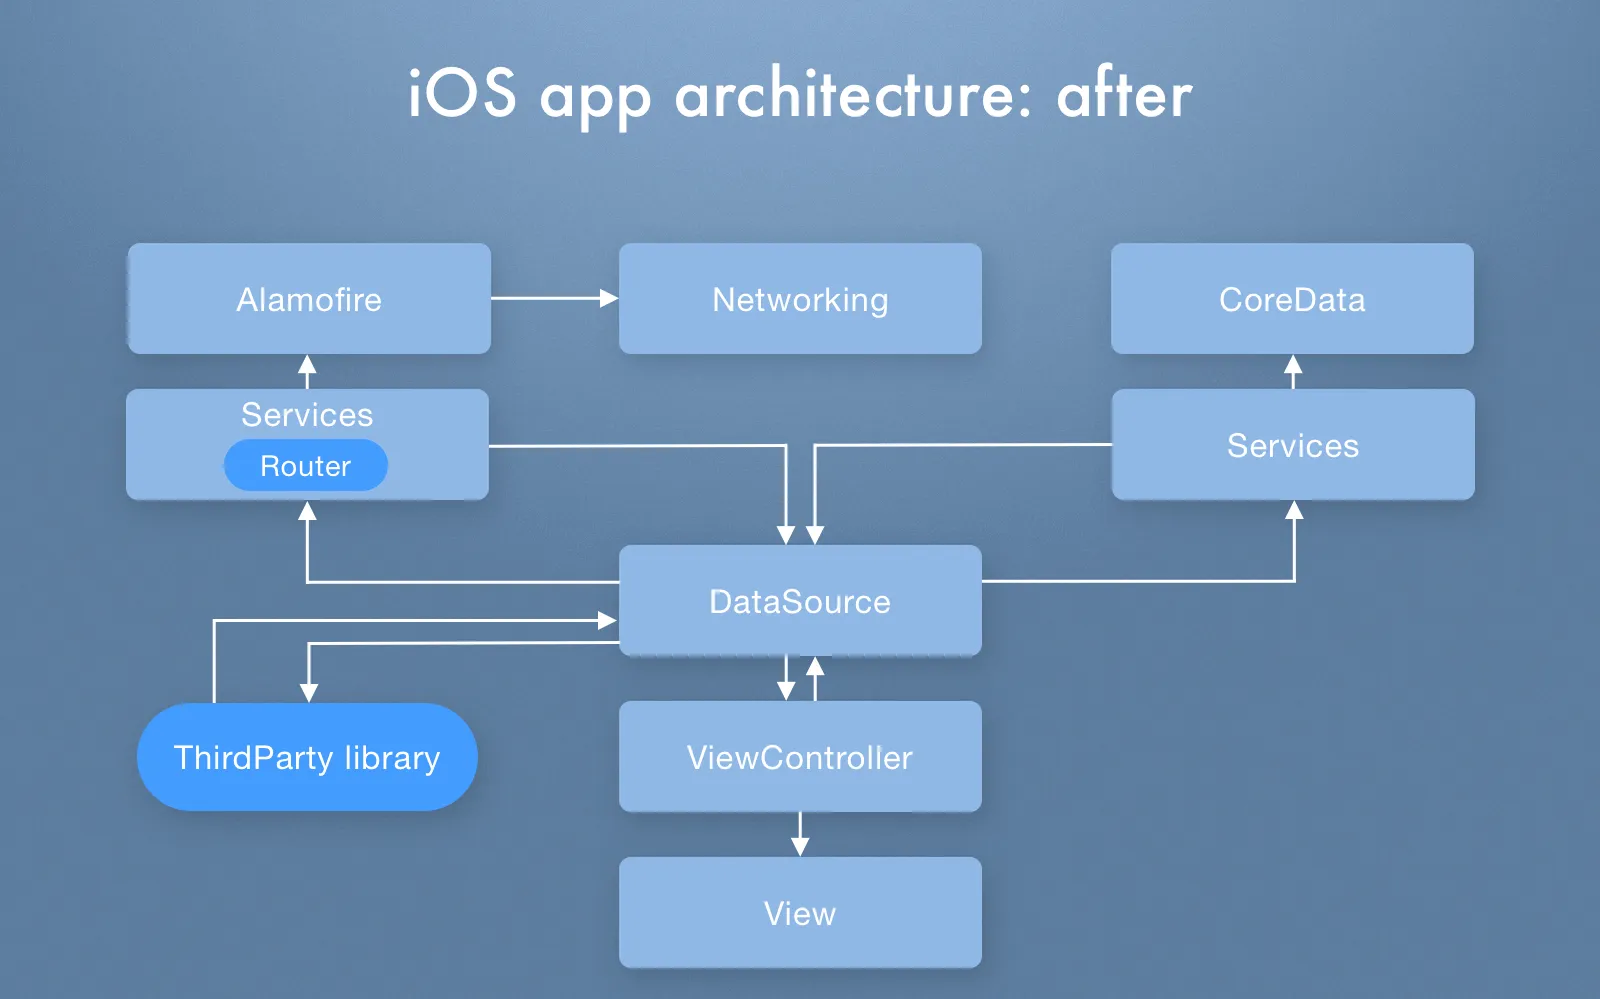 iOS app architecture after